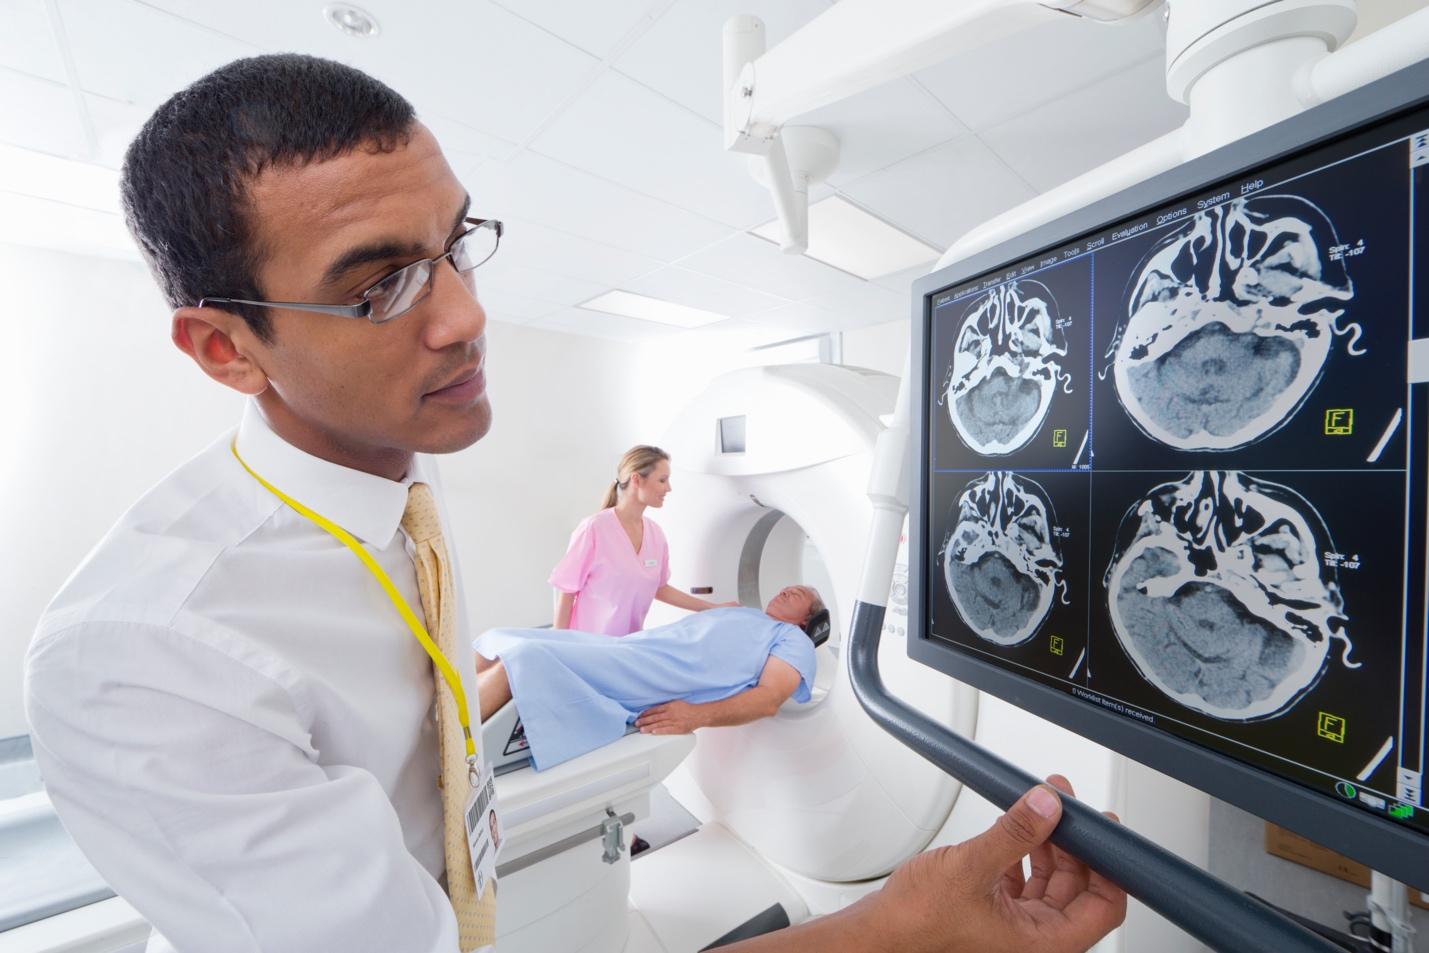 Surgeon examining digital brain scan on monitor with patient in the background